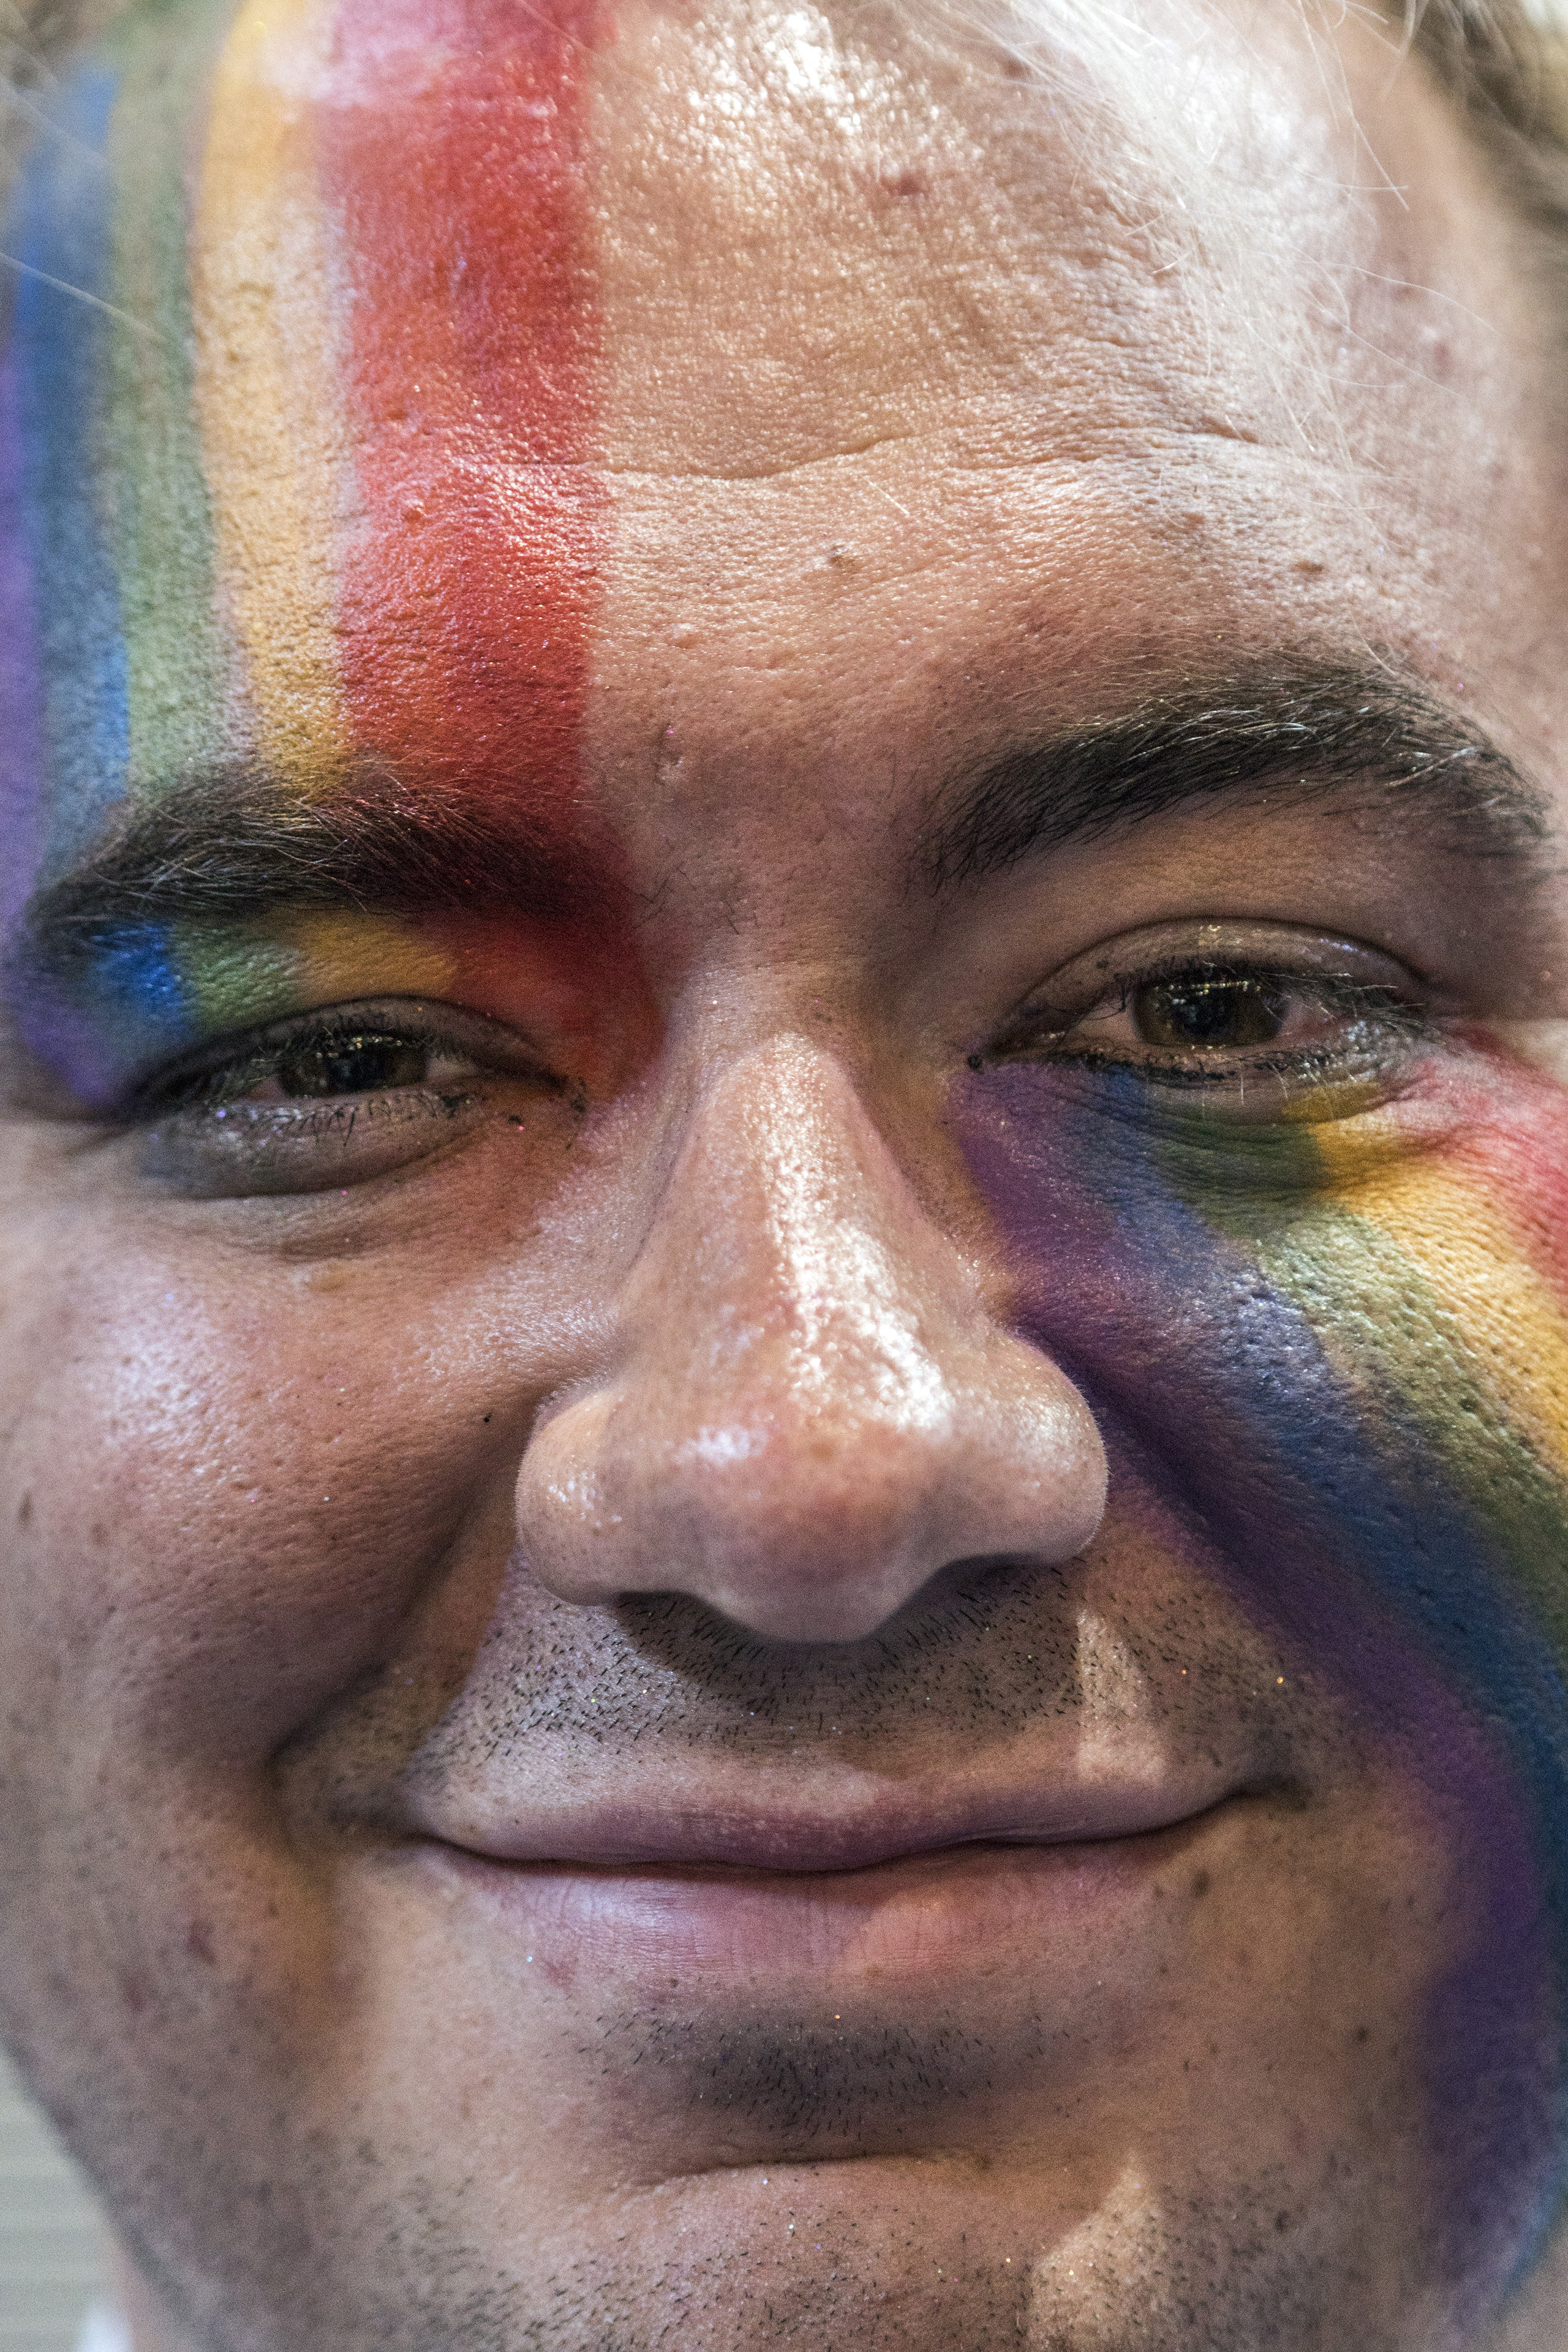 An attendee with pro LGBTQ face paint on the second day of the Democratic National Convention at the Wells Fargo Center, July 26, 2016 in Philadelphia, Pennsylvania.